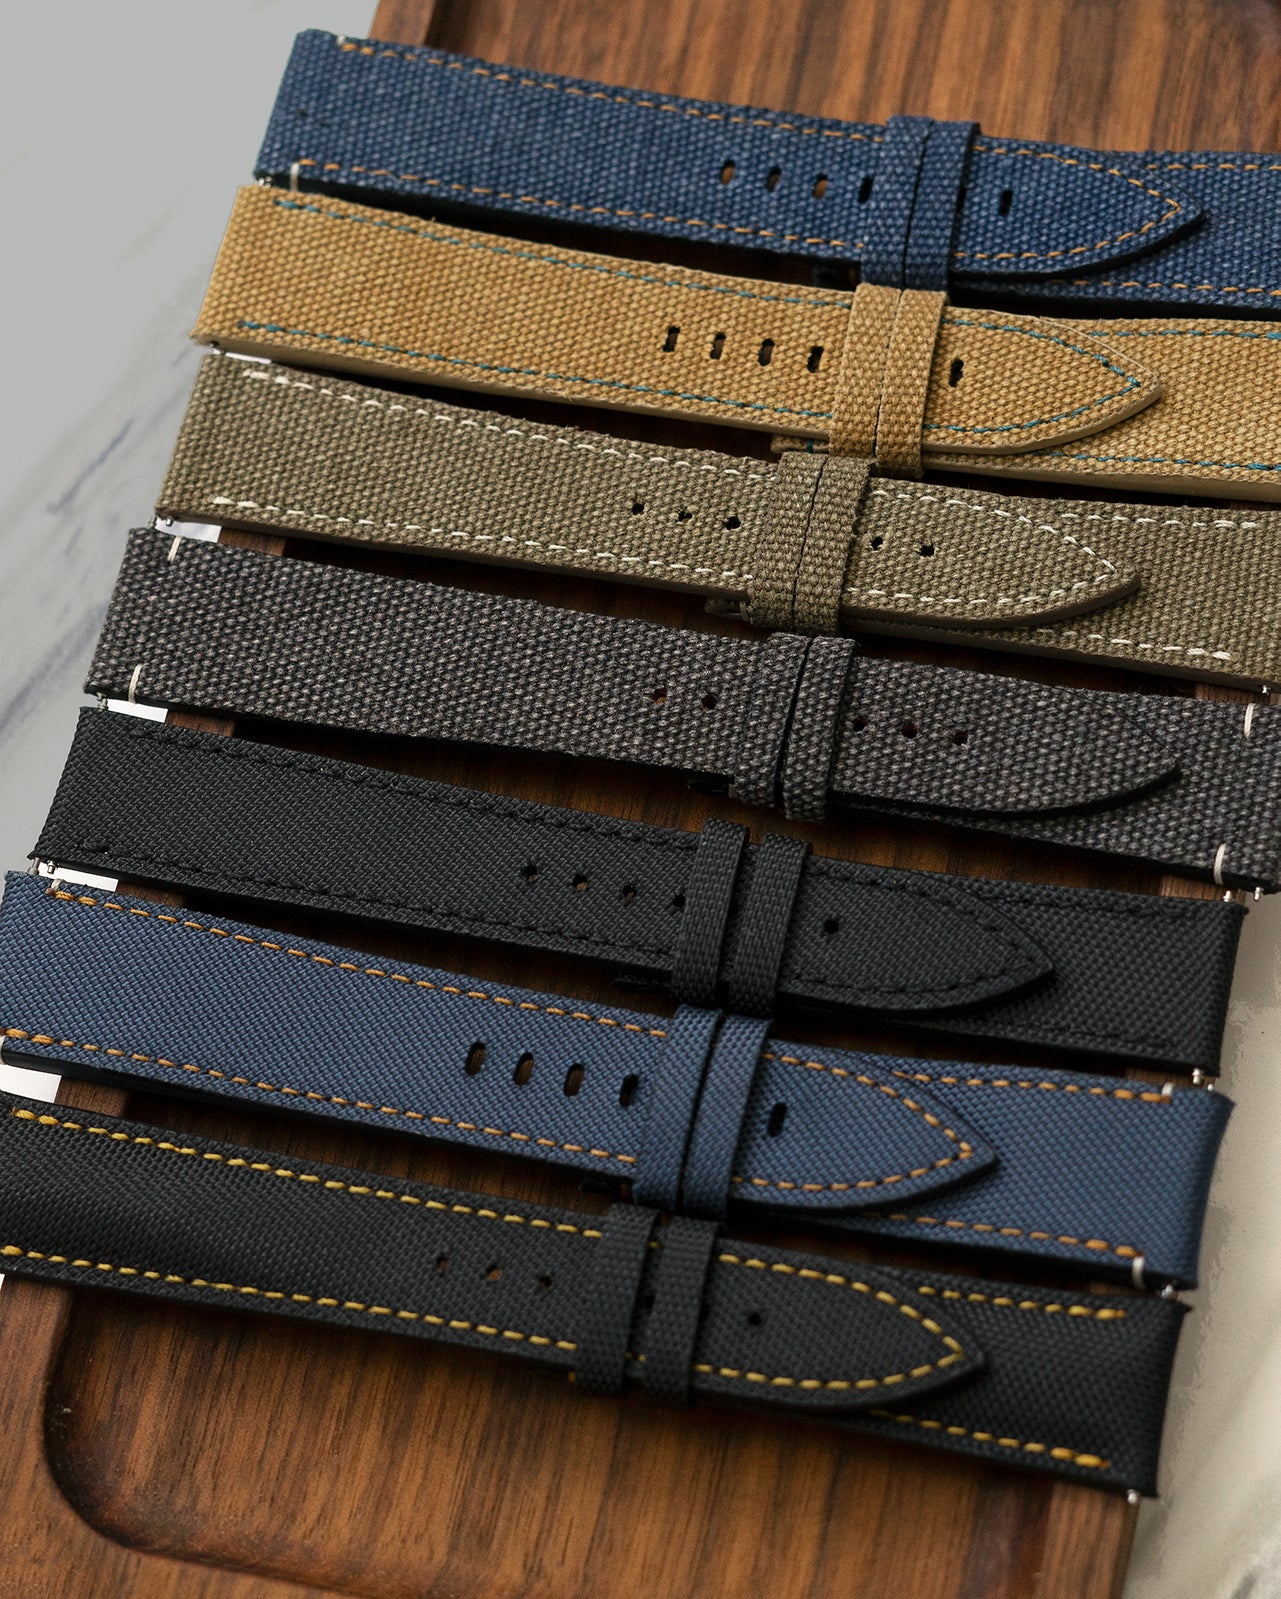 Saffiano Leather Strap (Navy) - Monstraps